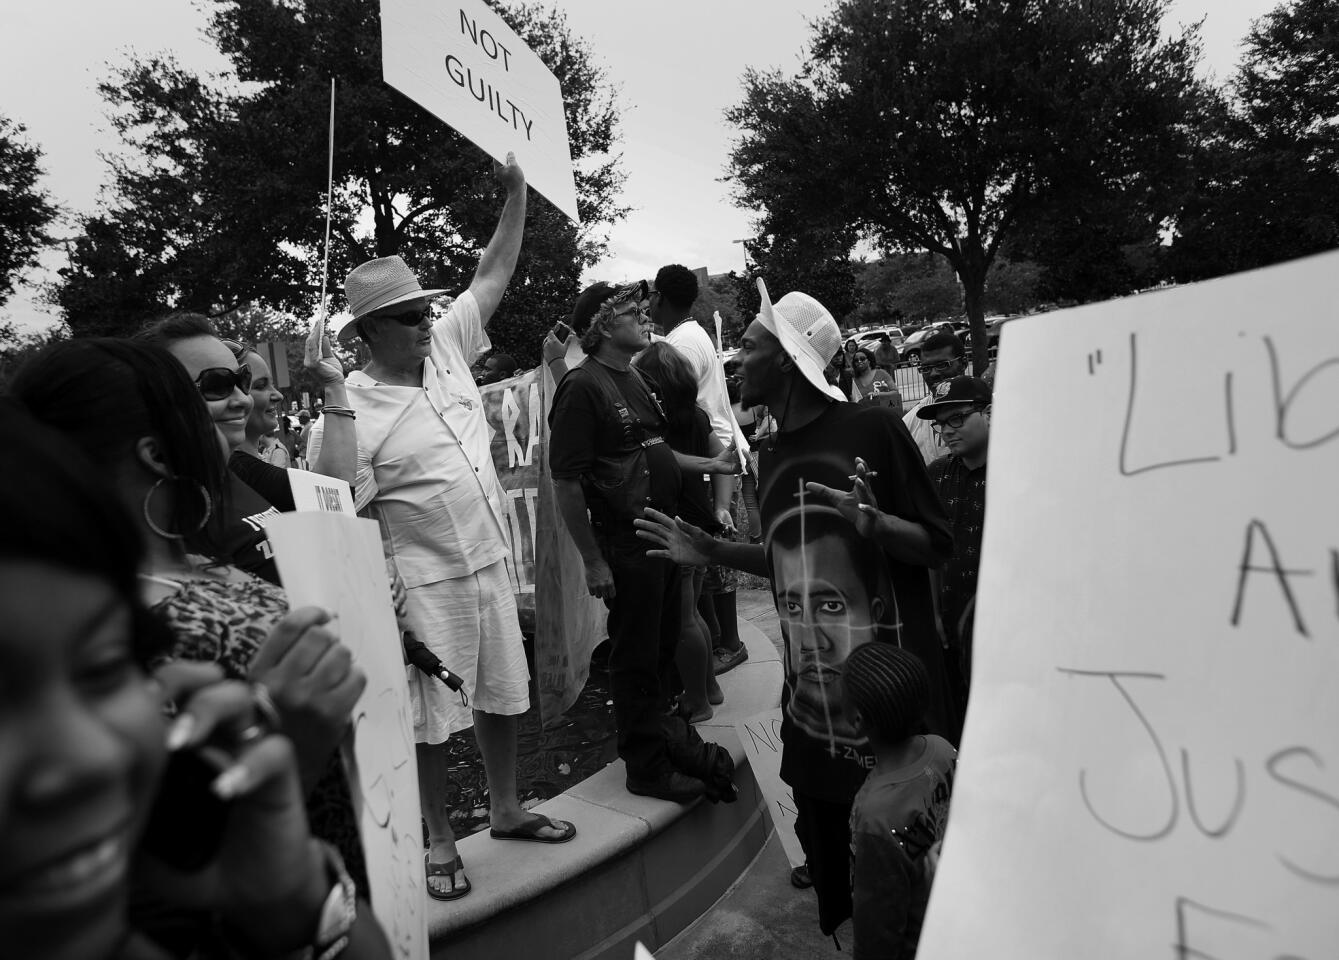 Protesters from both sides gather outside of the Seminole County Criminal Justice Center on Saturday, July 13, 2013. George Zimmerman is charged with 2nd-degree murder in the fatal shooting of Trayvon Martin, an unarmed teen, in 2012.